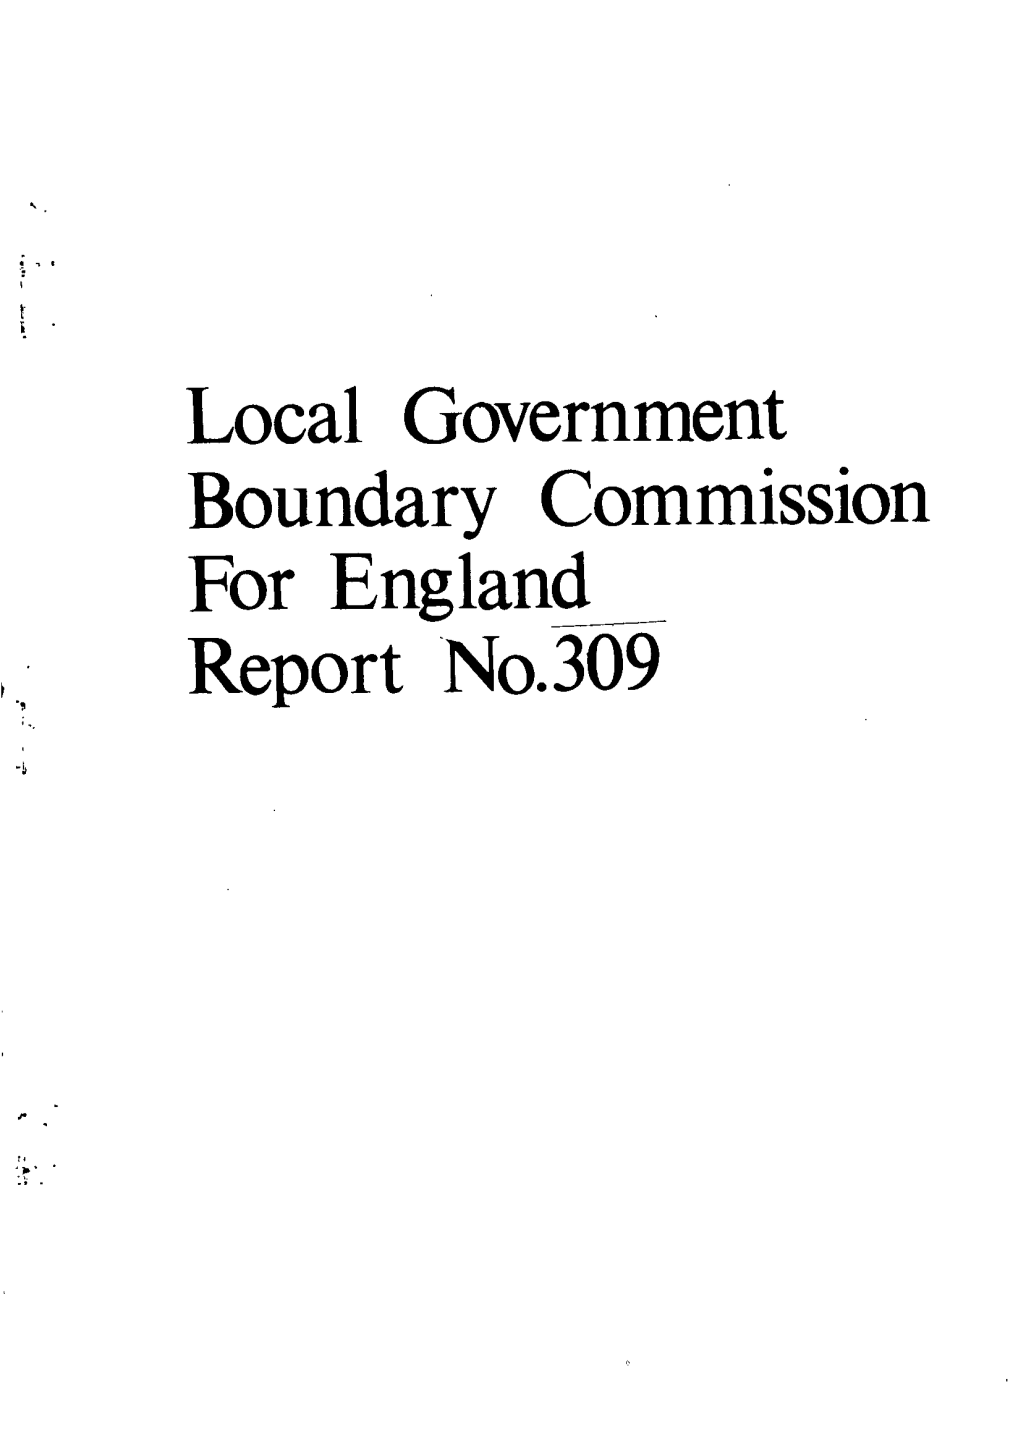 Local Government Boundary Commission for England Report No.309 LOCAL Governiil'nt